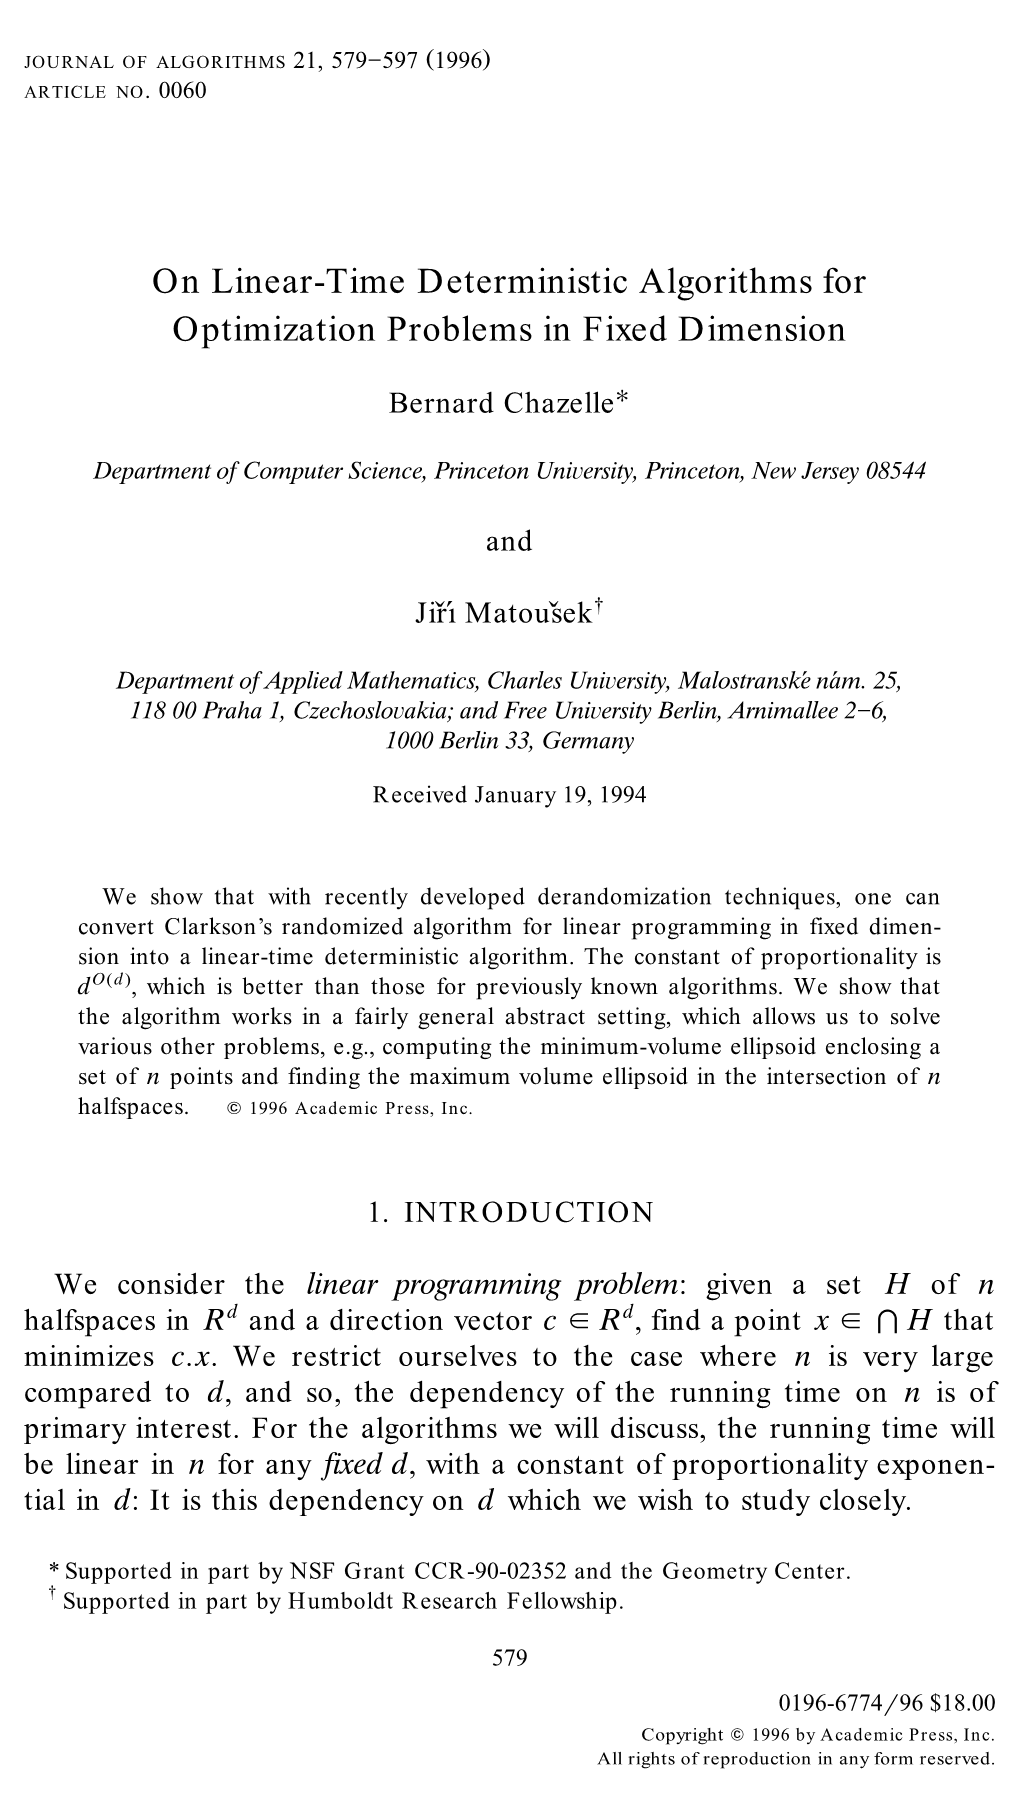 On Linear-Time Deterministic Algorithms for Optimization Problems in Fixed Dimension